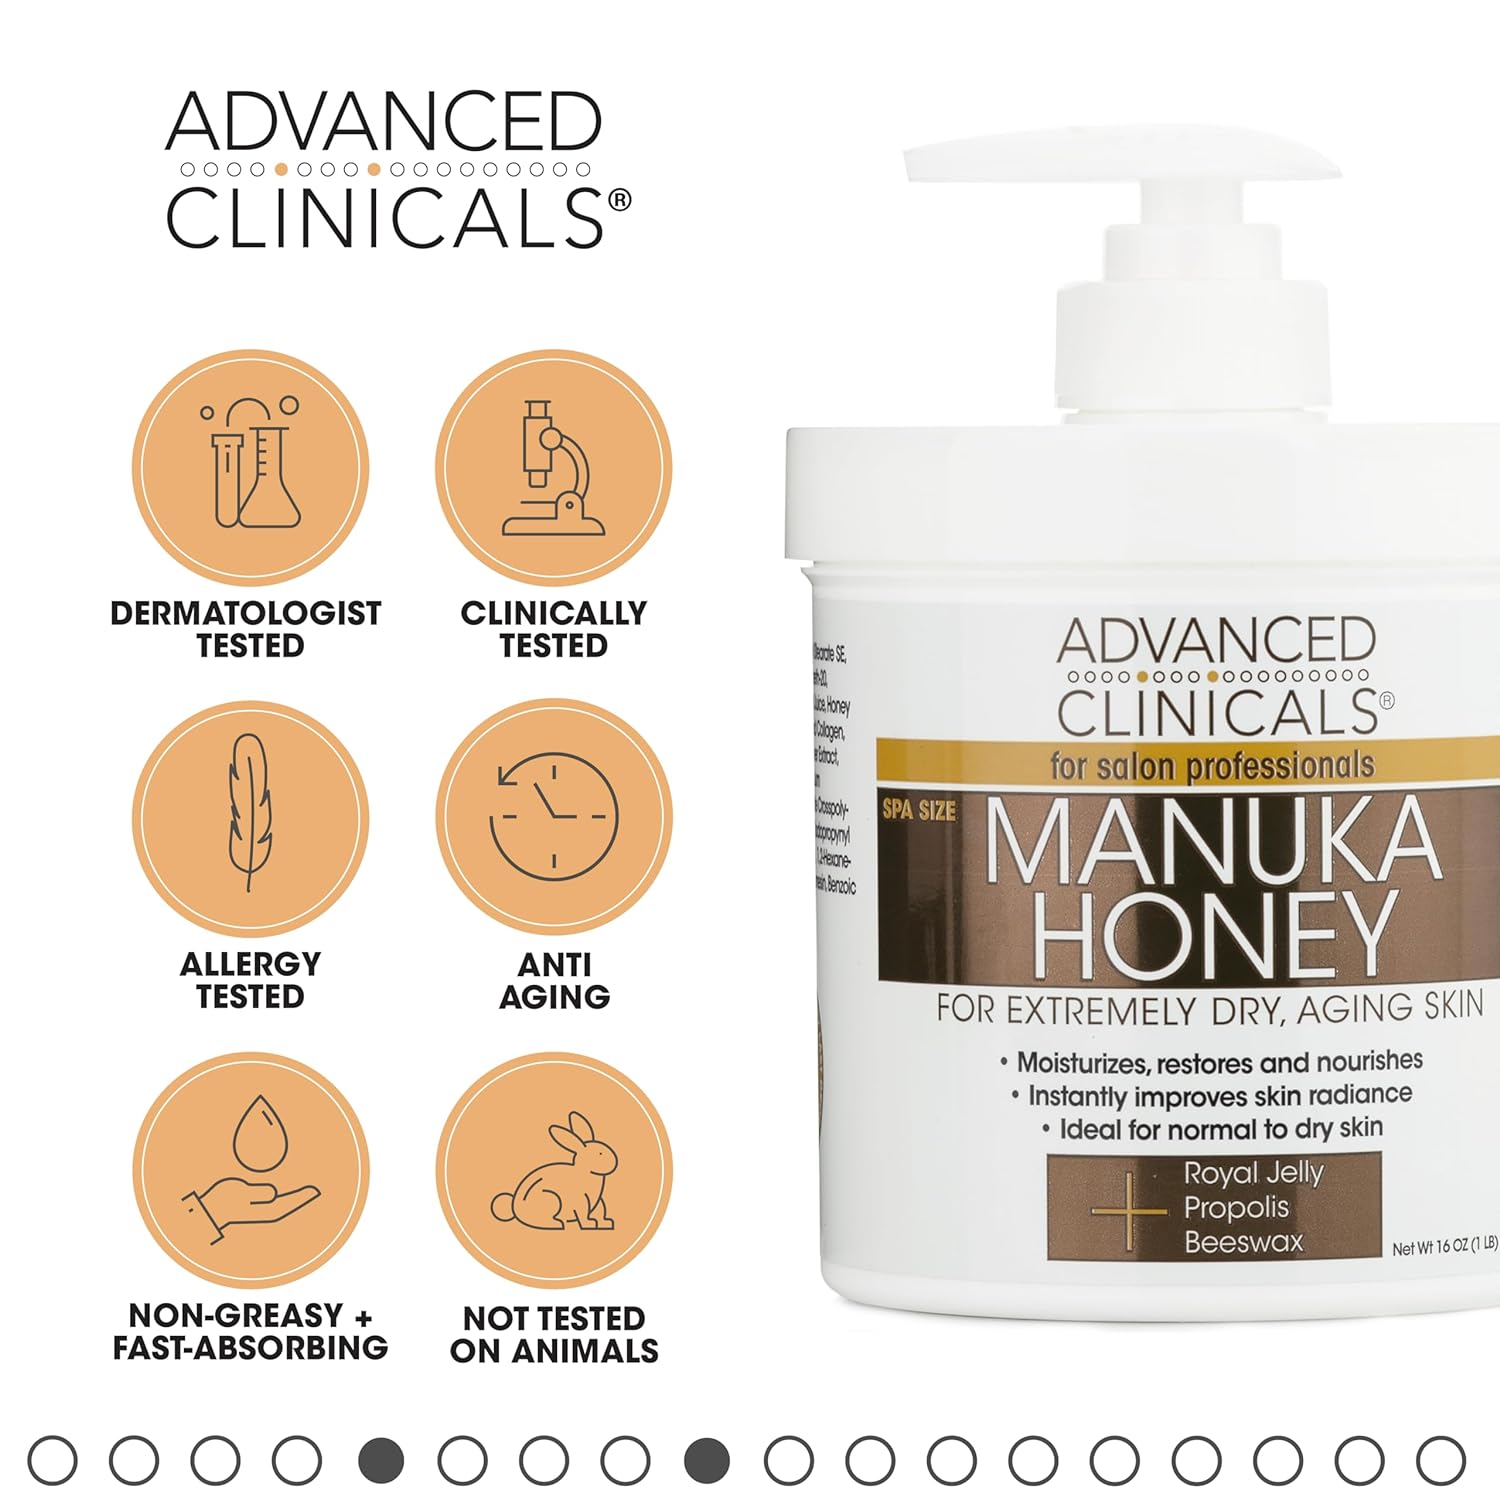 Advanced Clinicals Manuka Honey Cream Face Moisturizer & Body Butter For Dry Skin | Firming & Hydrating Miracle Balm Skin Care Moisturizing Lotion For Women, Wrinkles, & Sun Damaged Skin, 16Oz : Beauty & Personal Care